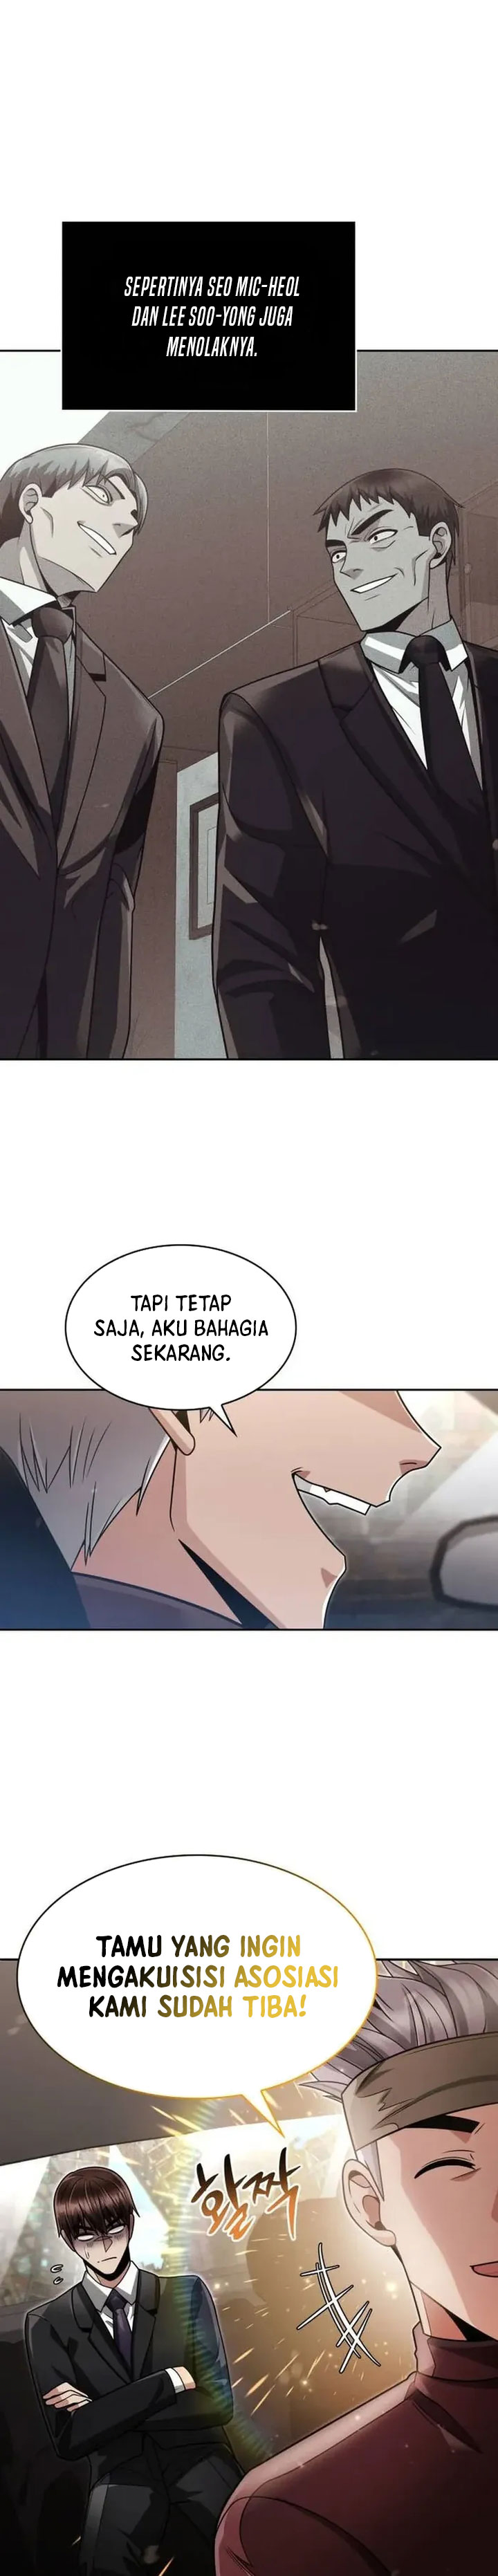 Dilarang COPAS - situs resmi www.mangacanblog.com - Komik clever cleaning life of the returned genius hunter 058 - chapter 58 59 Indonesia clever cleaning life of the returned genius hunter 058 - chapter 58 Terbaru 18|Baca Manga Komik Indonesia|Mangacan